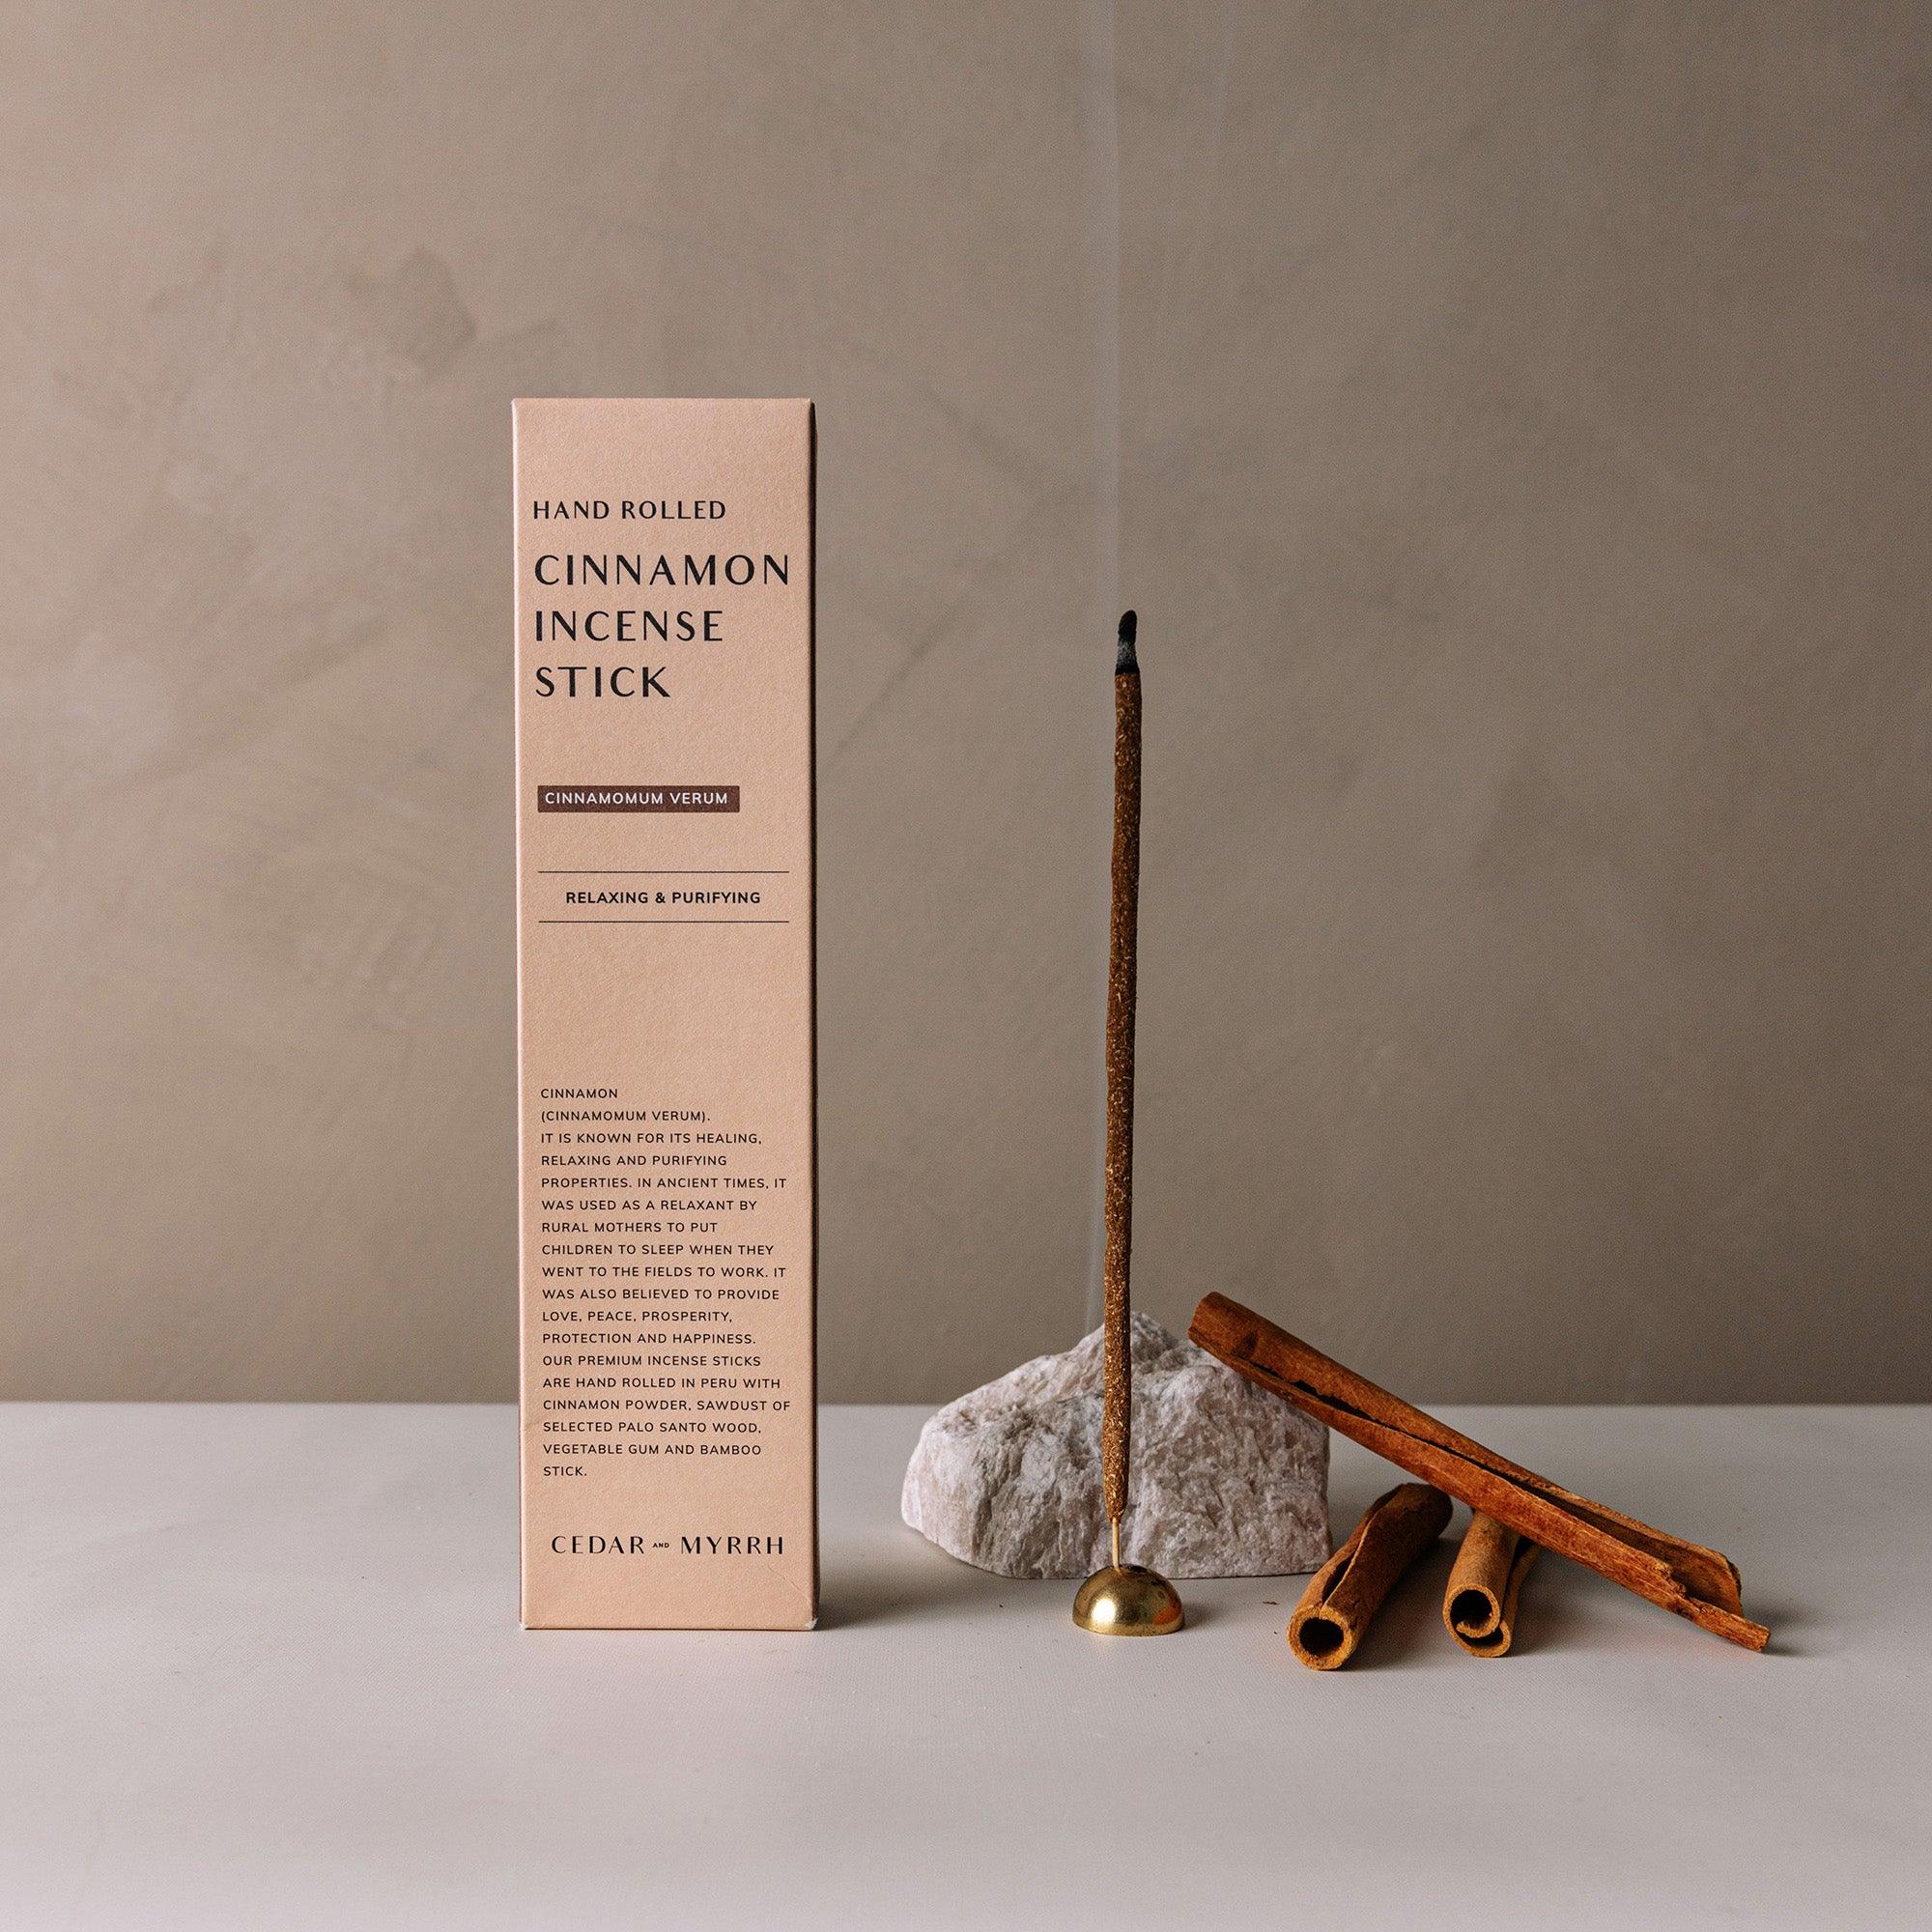 Left: package of cinnamon incense; Right: burning incense stick with incense holder and 3 pieces of cinnamon roll sticks and a rock.